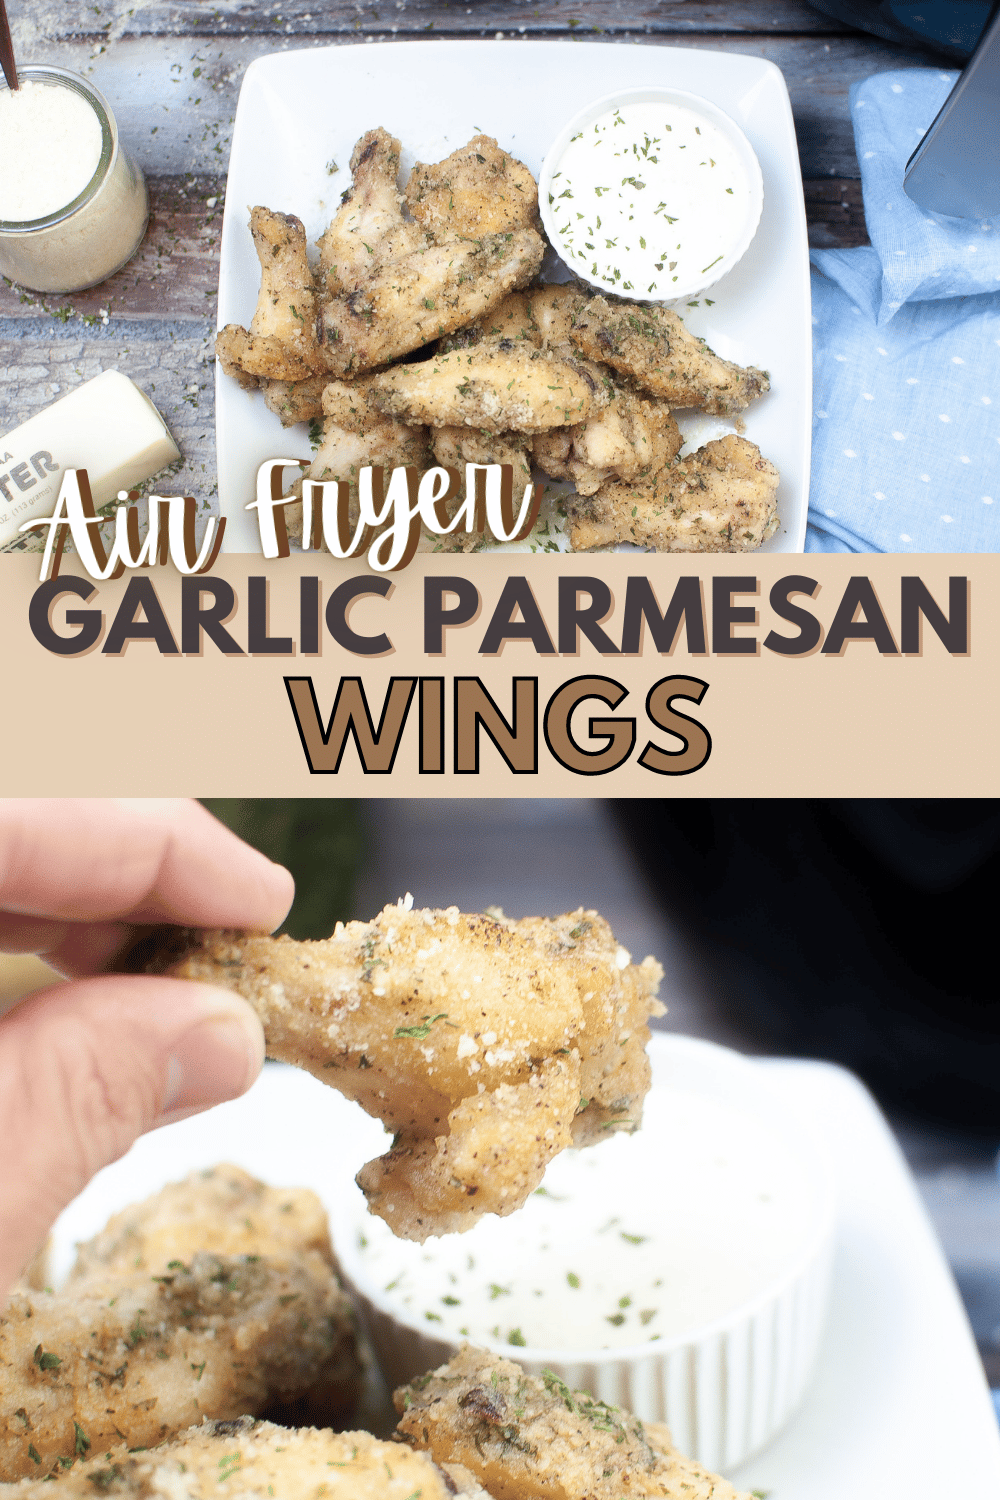 Air Fryer Garlic Parmesan Wings are a delicious and easy appetizer or main dish! Serve with your favorite dipping sauce for a tasty meal! #airfryer #garlicparmesanwings #chicken #appetizer via @wondermomwannab